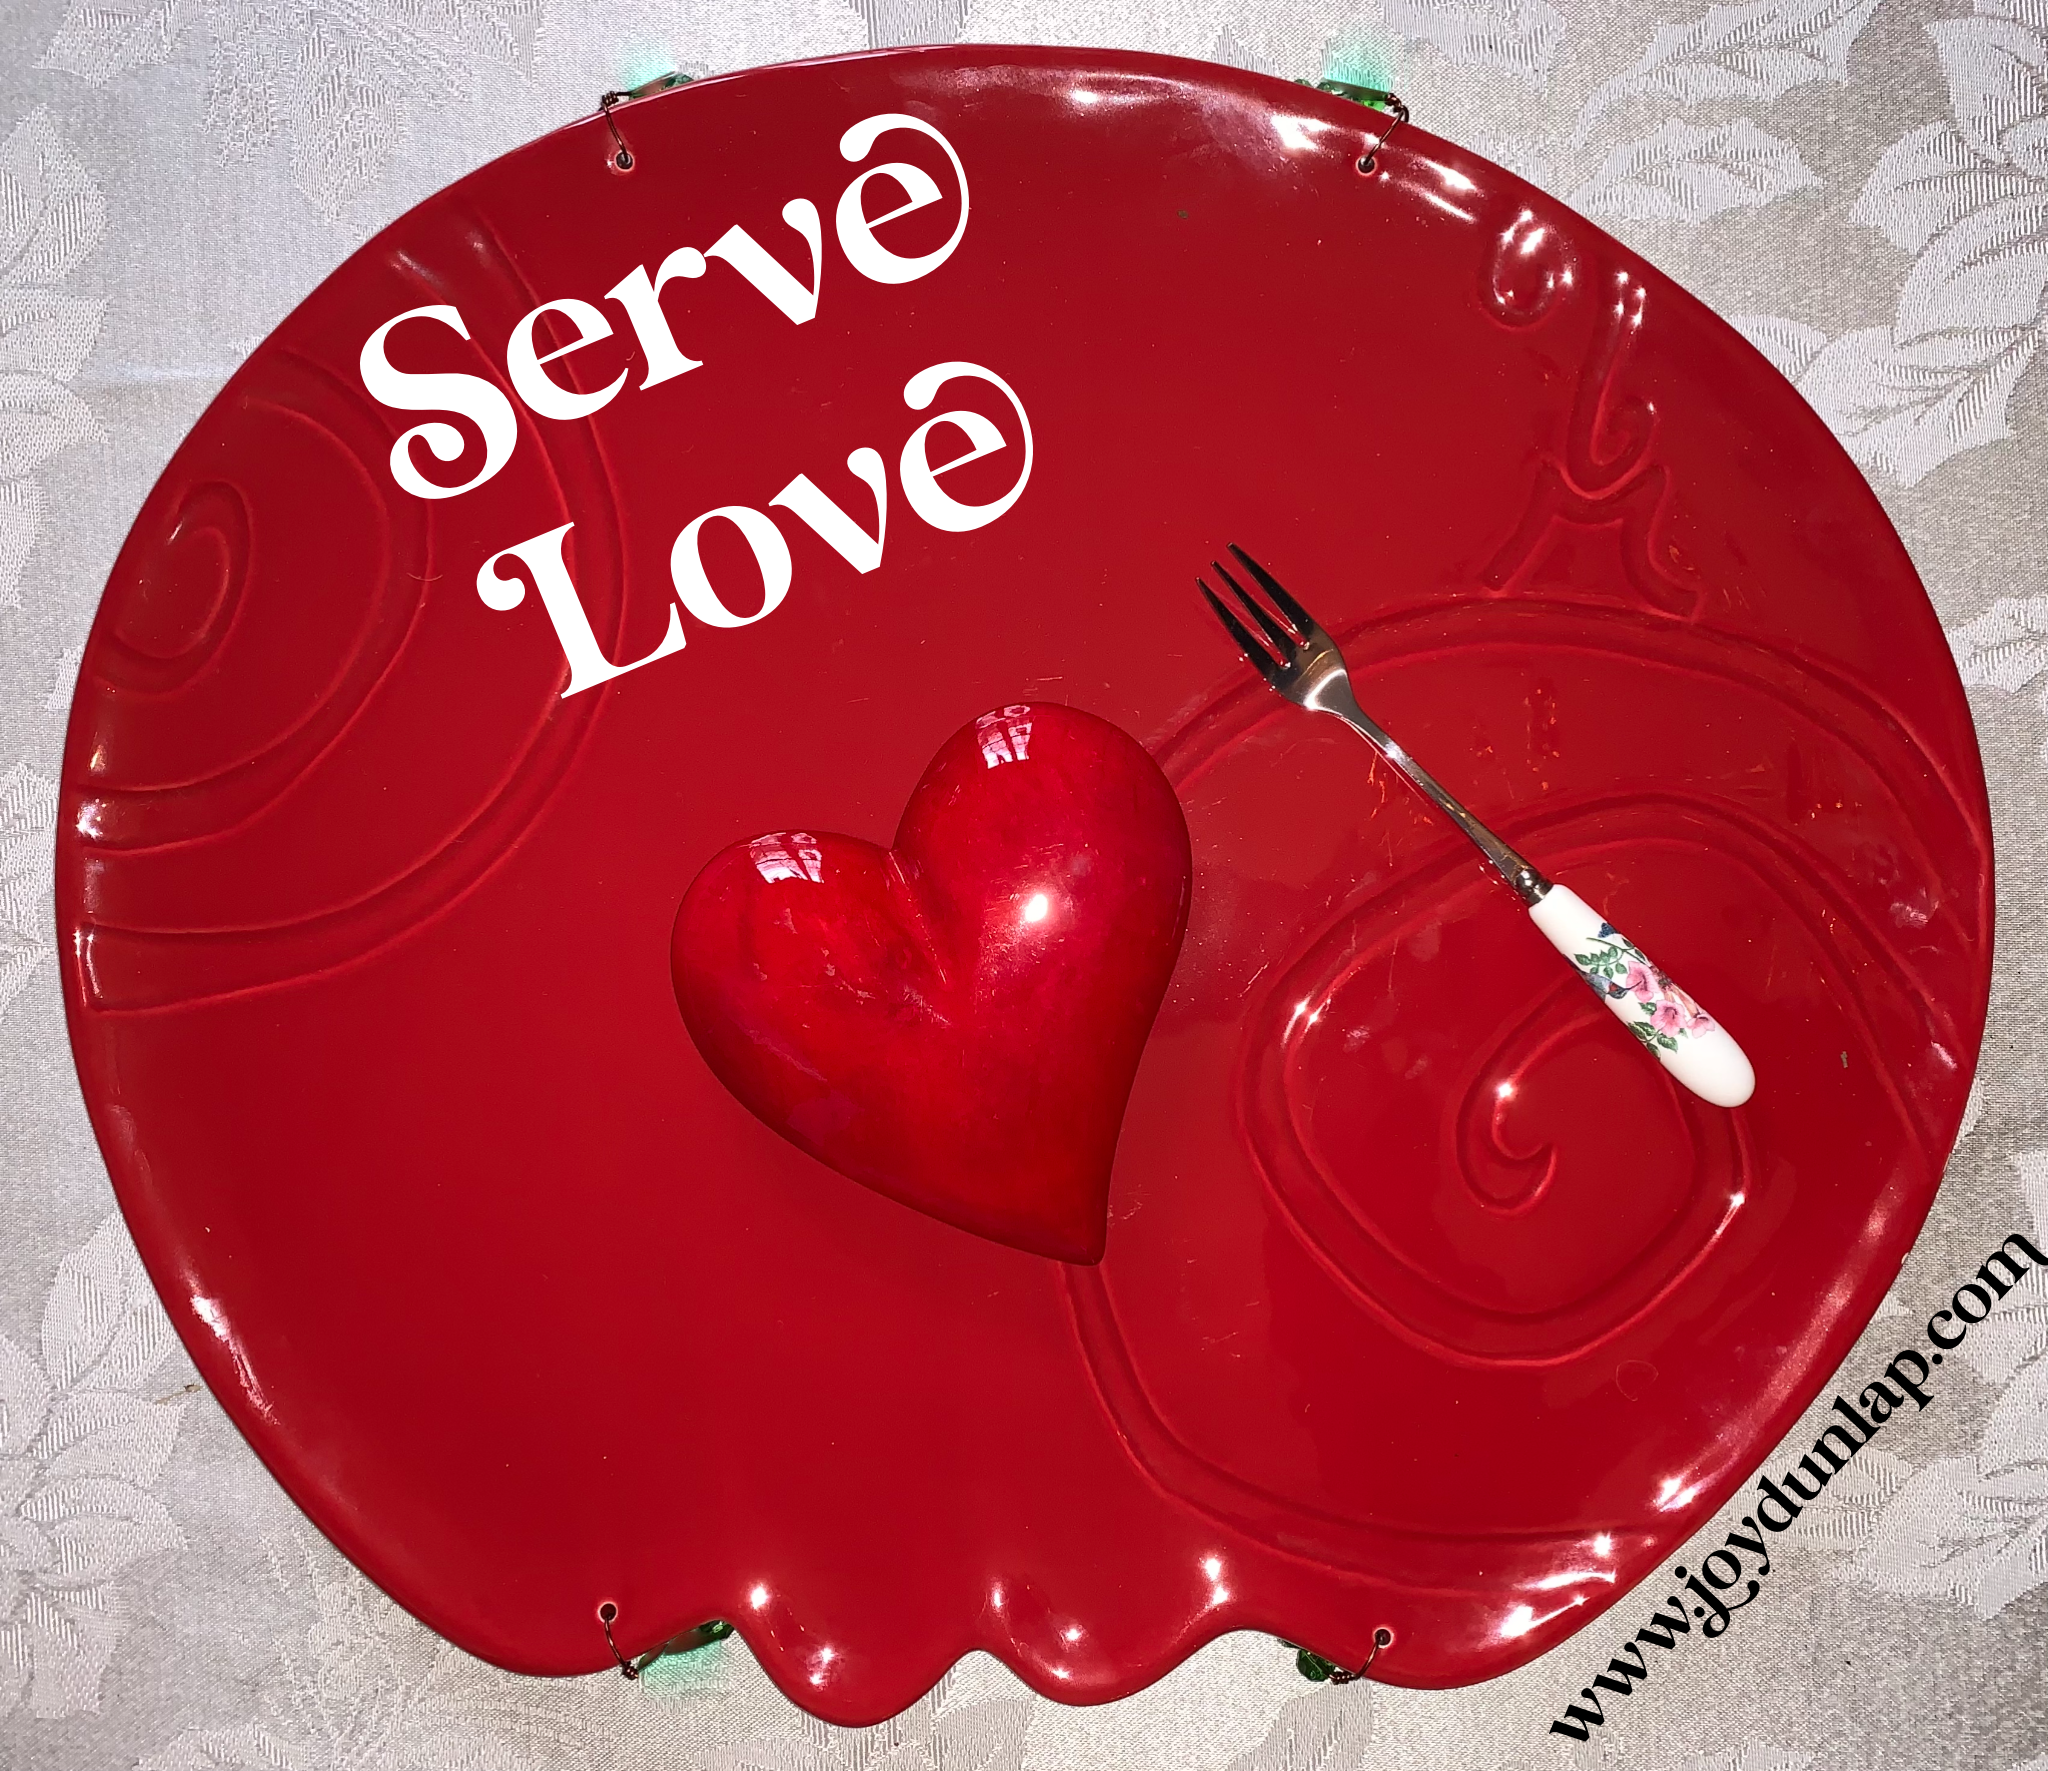 Serve love with words of kindness, compassion and gratitude